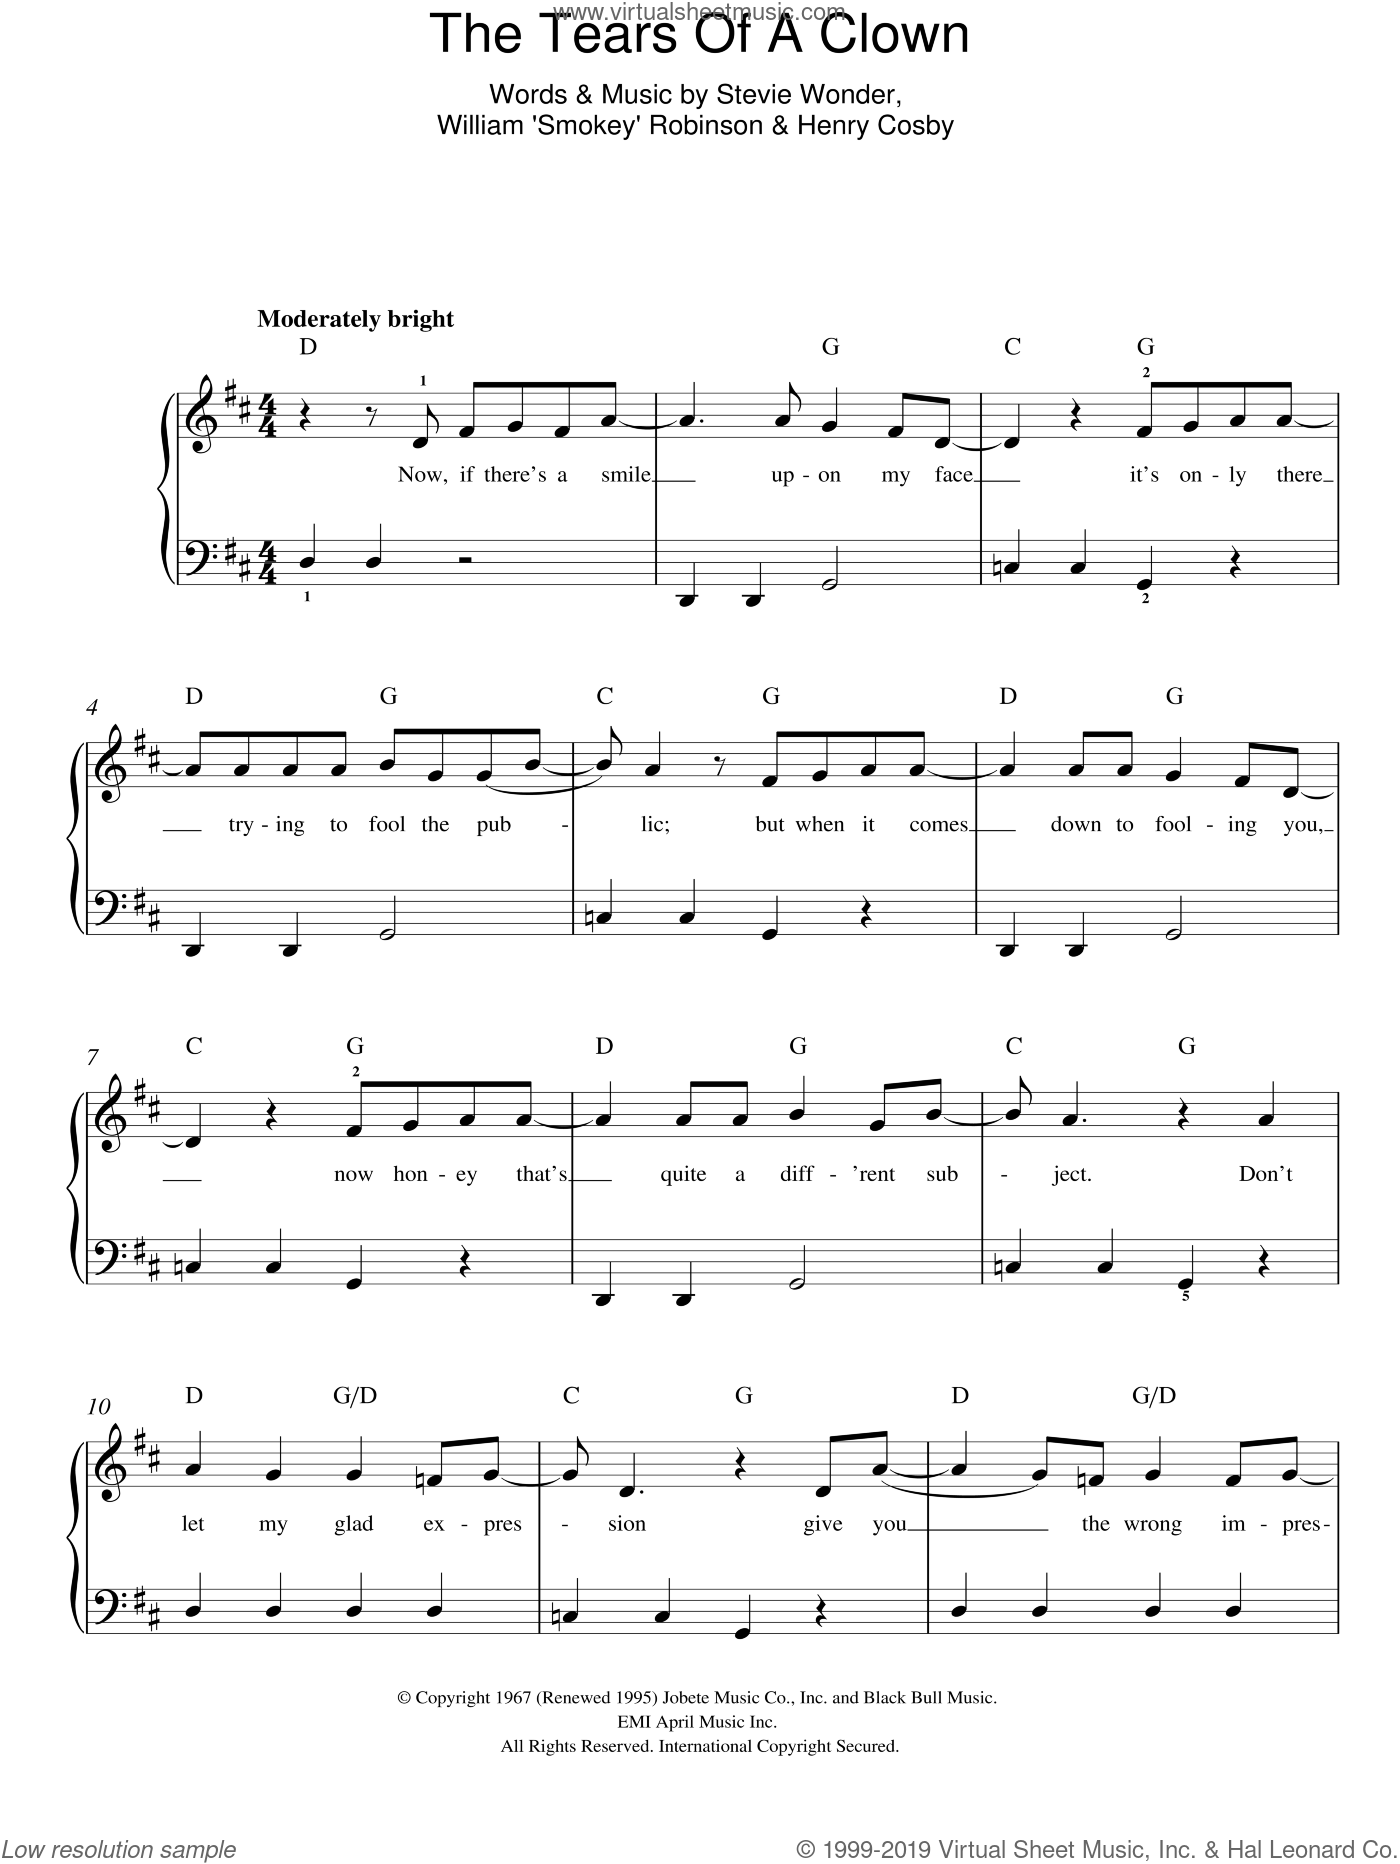 The Meaning of Tears - Tennis Ace OST Sheet music for Piano (Solo)